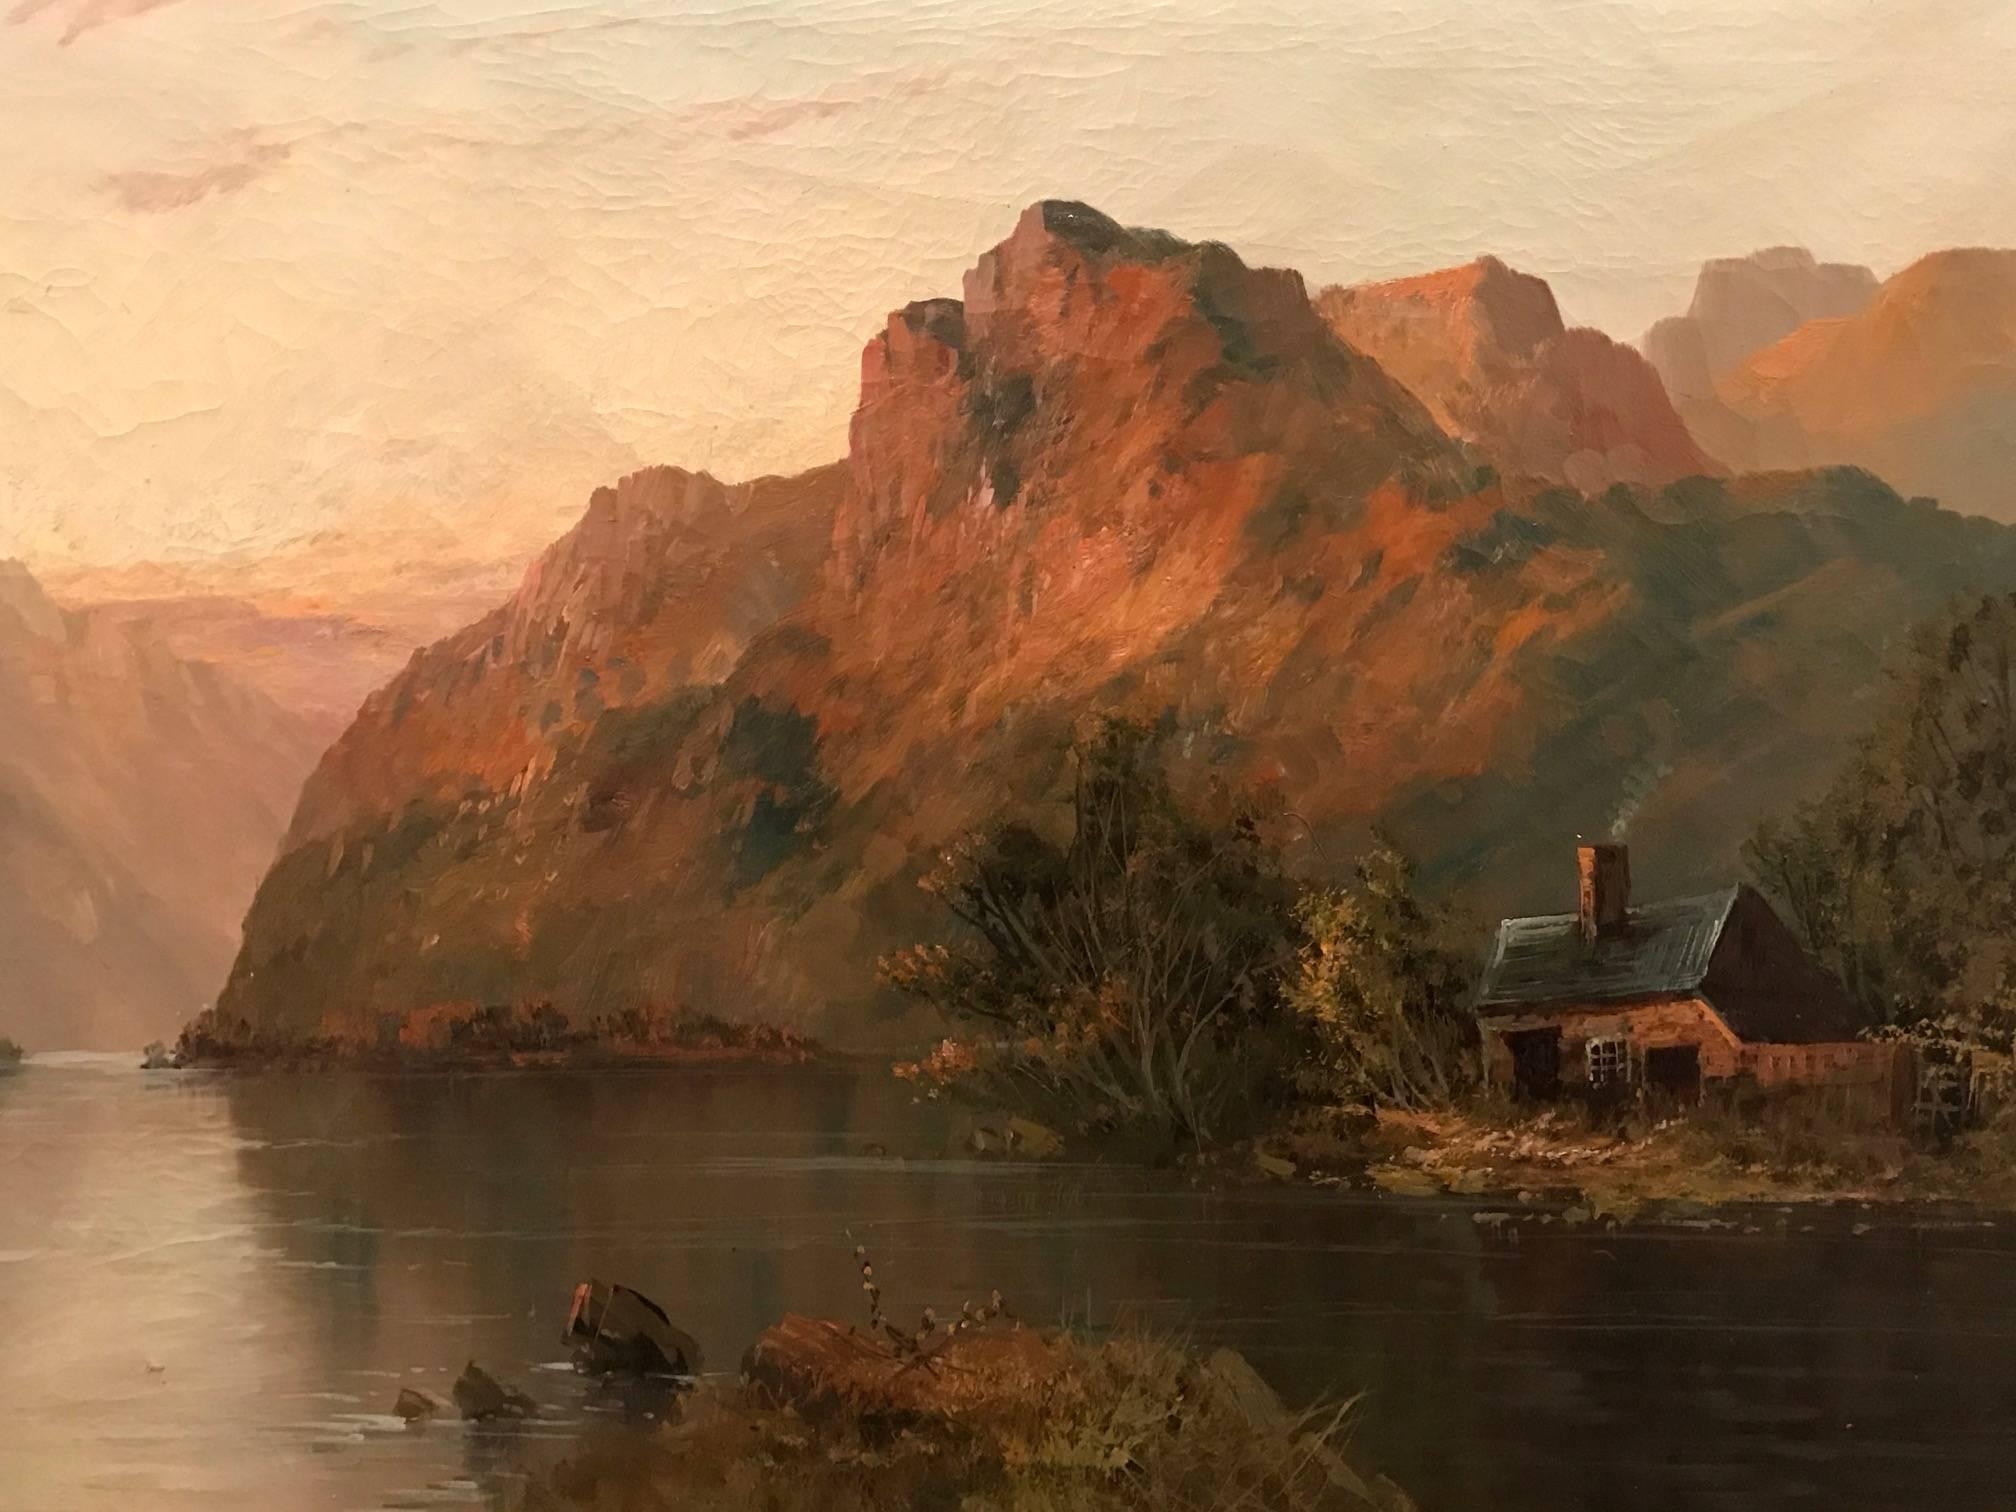 Magnificent large scale antique oil painting depicting this beautiful Scottish Highlands loch scene as the sun sets on the day. 

Warm, golden colours flood the landscape as the ancient rugged mountains tower over the calm loch waters and old